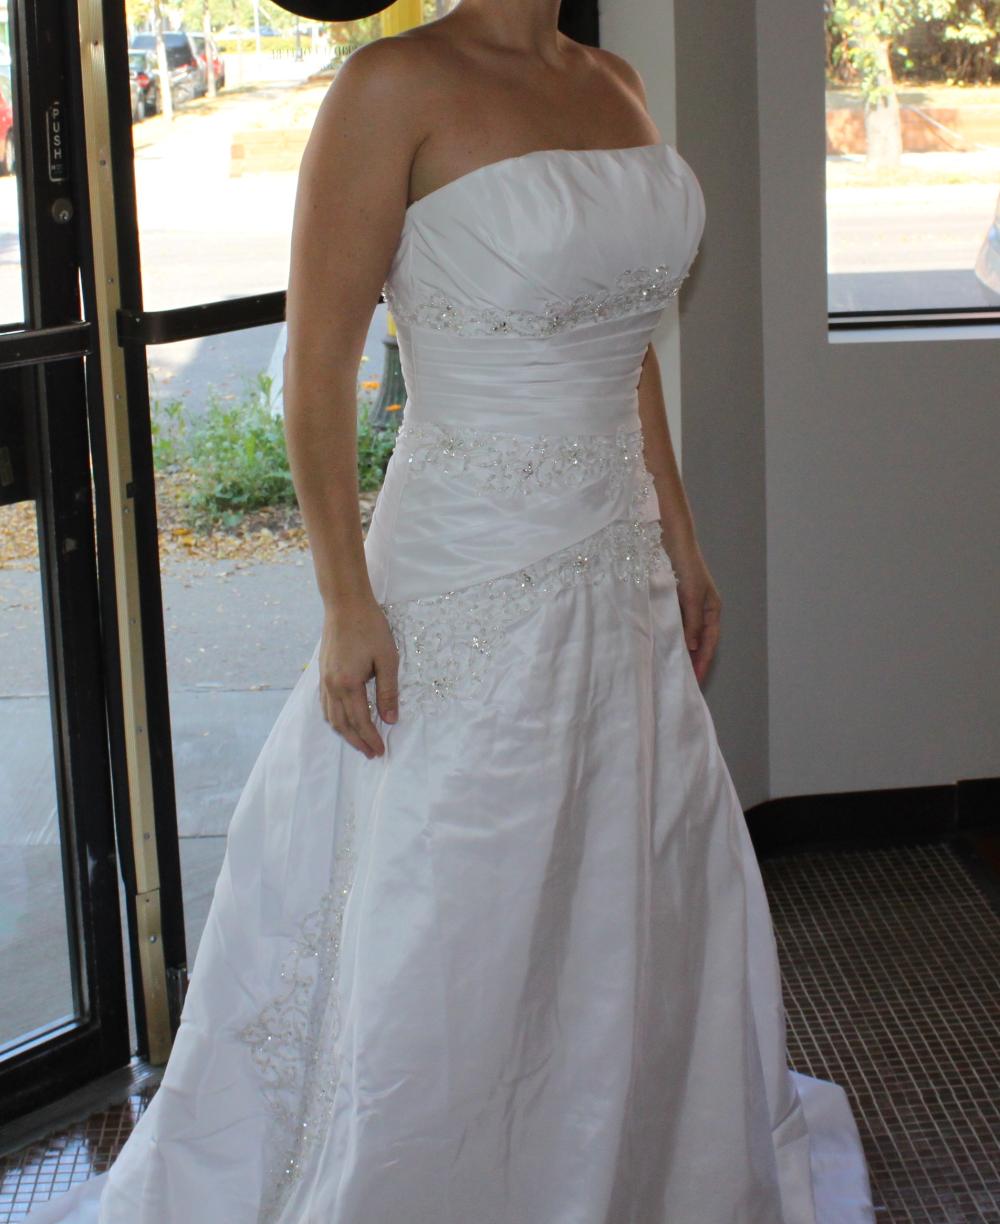 BRAND NEW WHITE WEDDING DRESS- tags are still on, never altered or worn